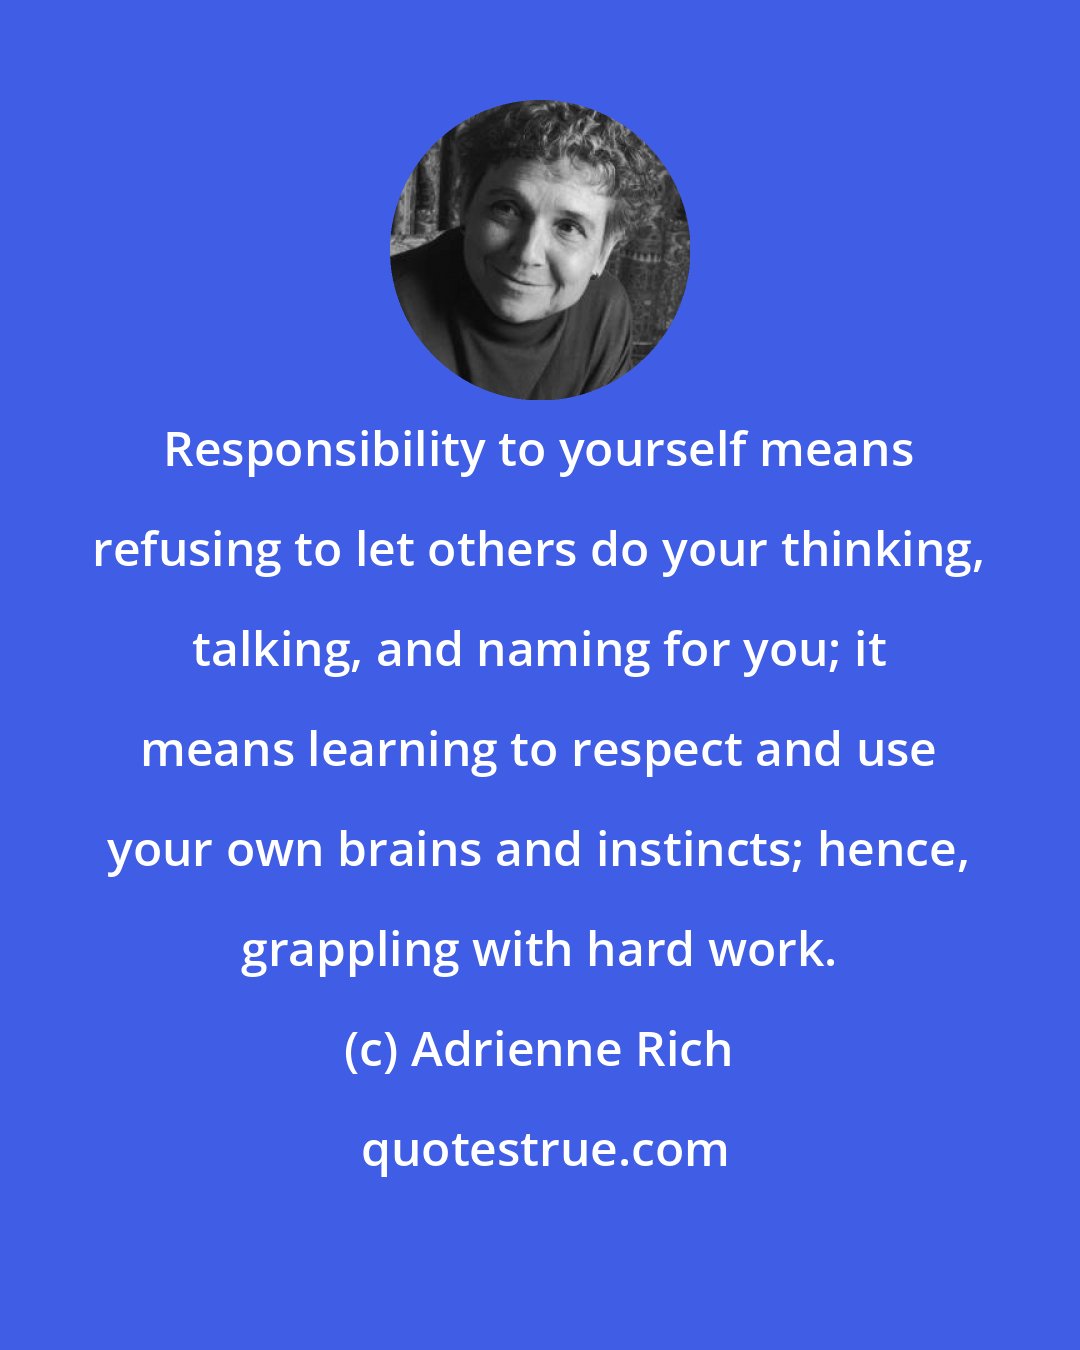 Adrienne Rich: Responsibility to yourself means refusing to let others do your thinking, talking, and naming for you; it means learning to respect and use your own brains and instincts; hence, grappling with hard work.